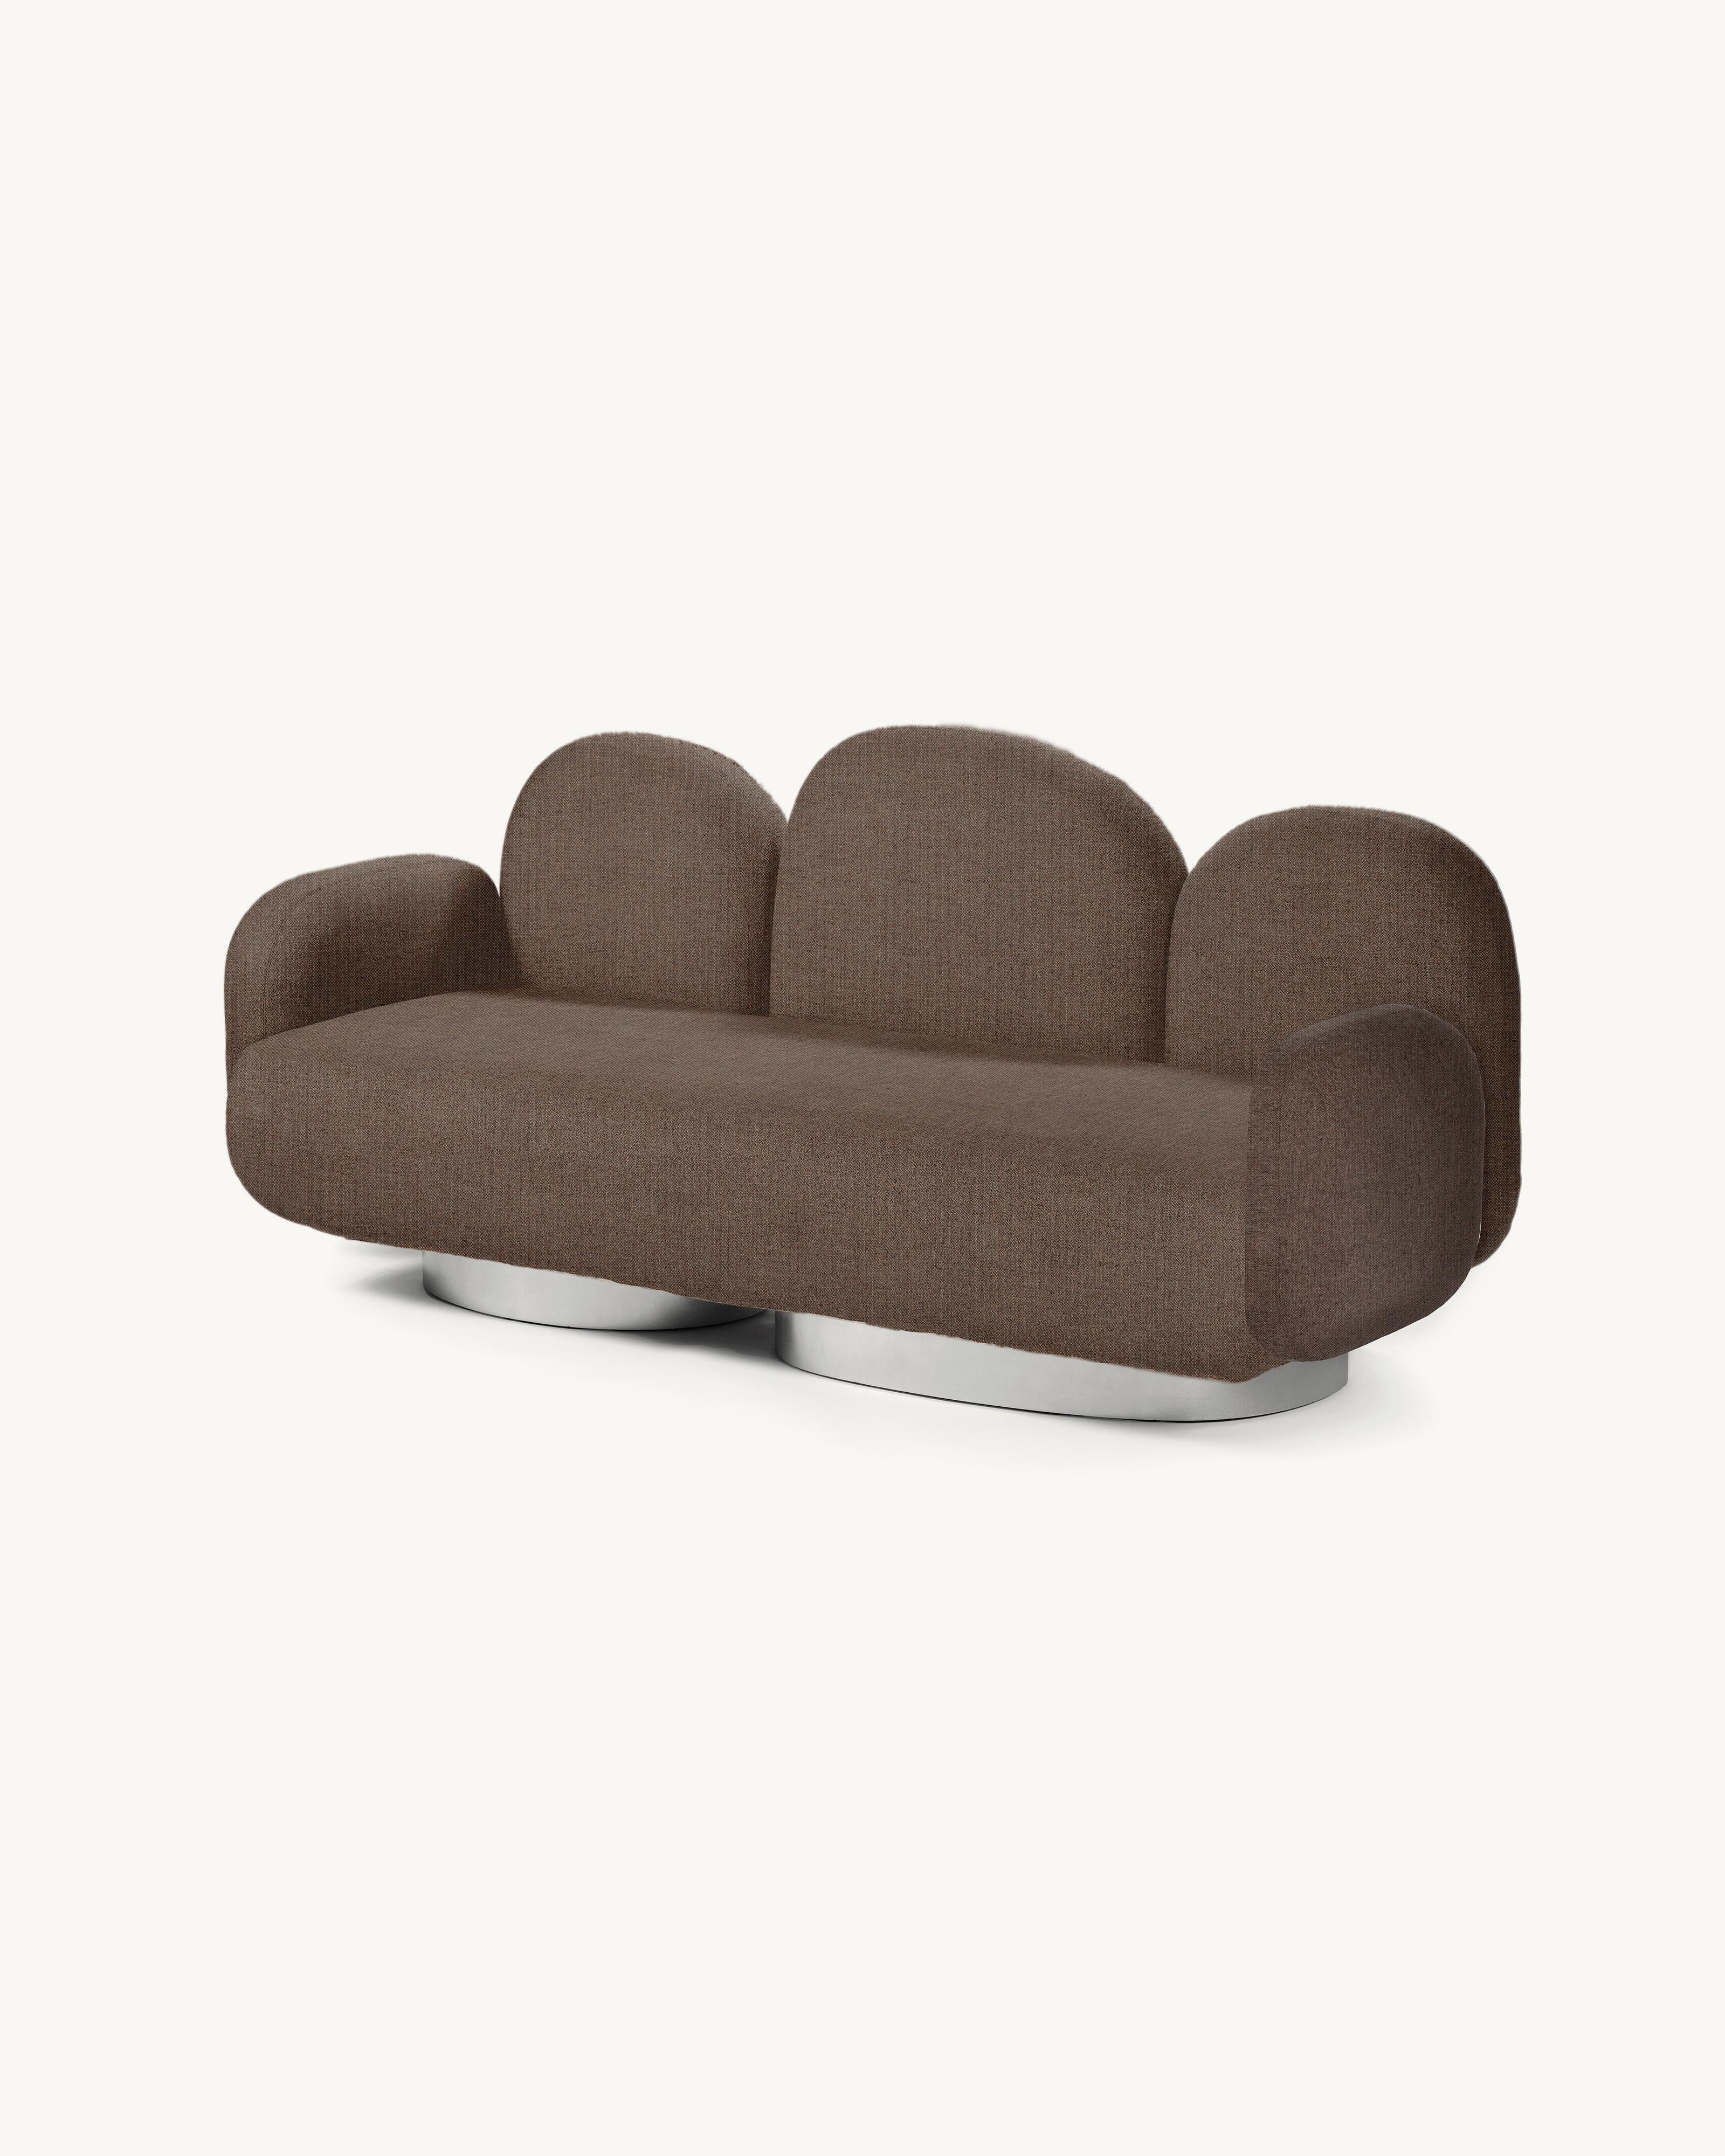 Aluminum Contemporary Sofa 'Assemble' by Destroyers/Builders, 2 seaters + 2 armrests For Sale